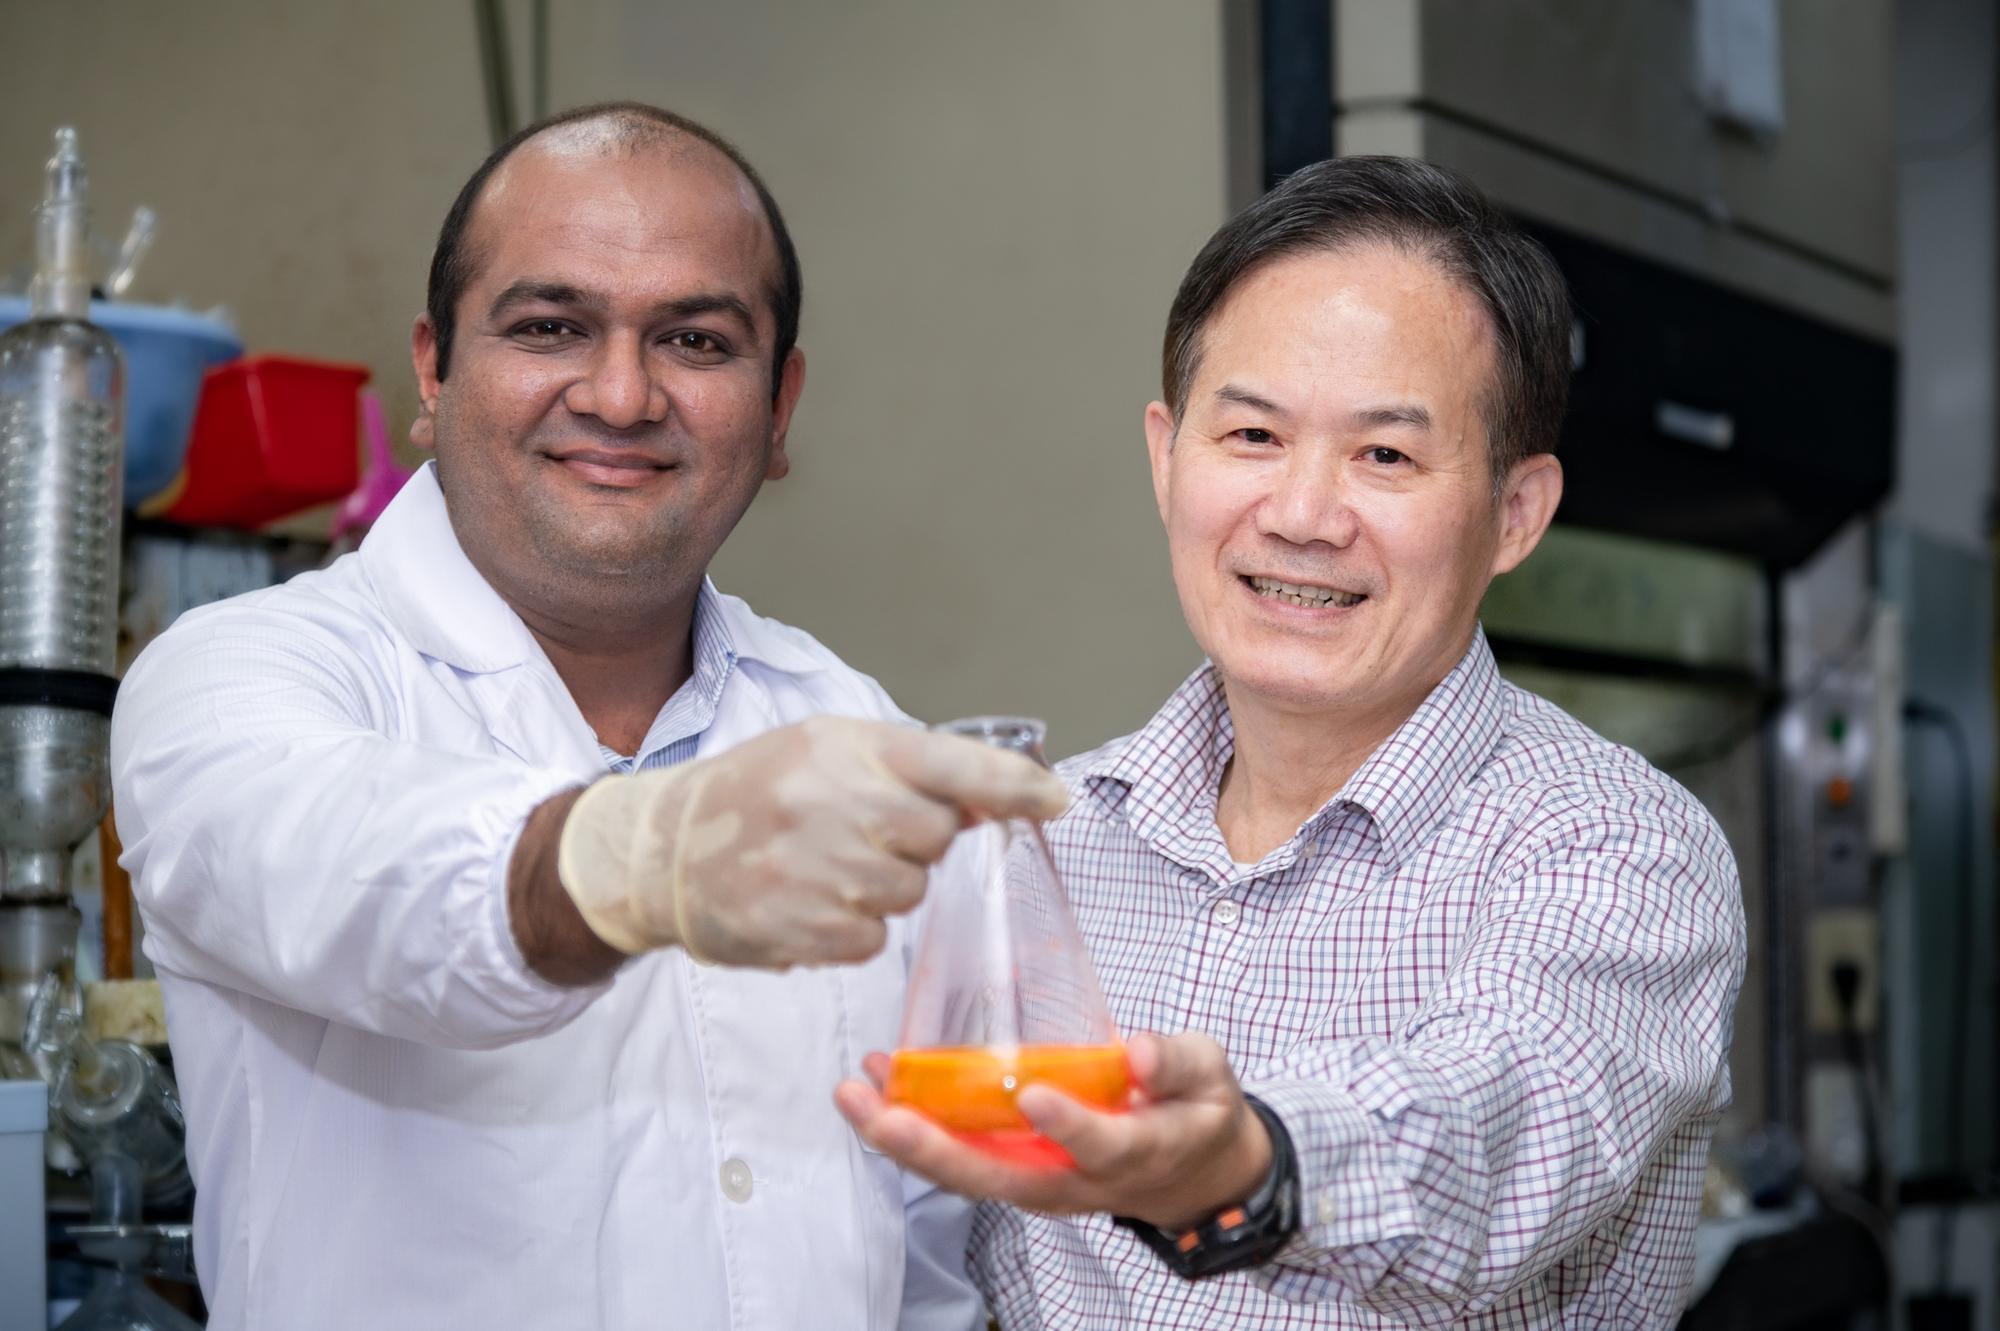 NTHU Distinguished professor Kuo Chu Hwang (黃國柱) (right) and postdoctoral researcher Vaibhav Pramod Charpe decompose persistent organic pollutants (POPs) such as dioxins.